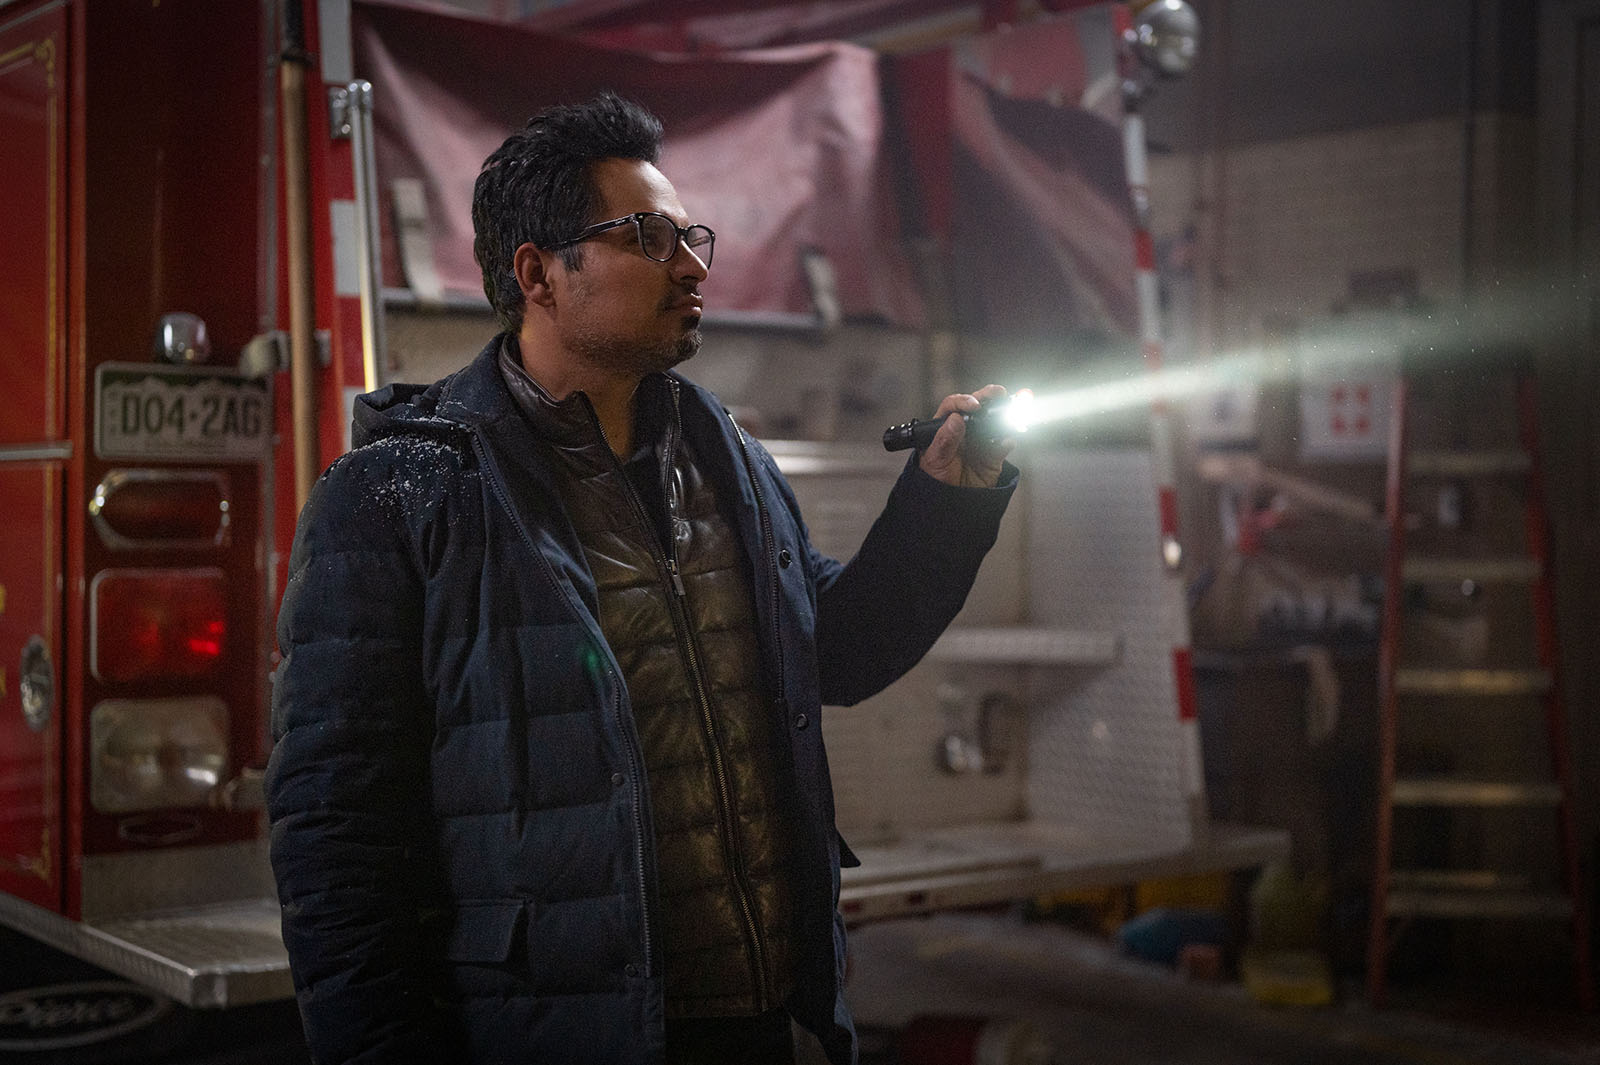 Tom Lopez (Michael Peña) sheds some light on things. Image © Lionsgate Movies